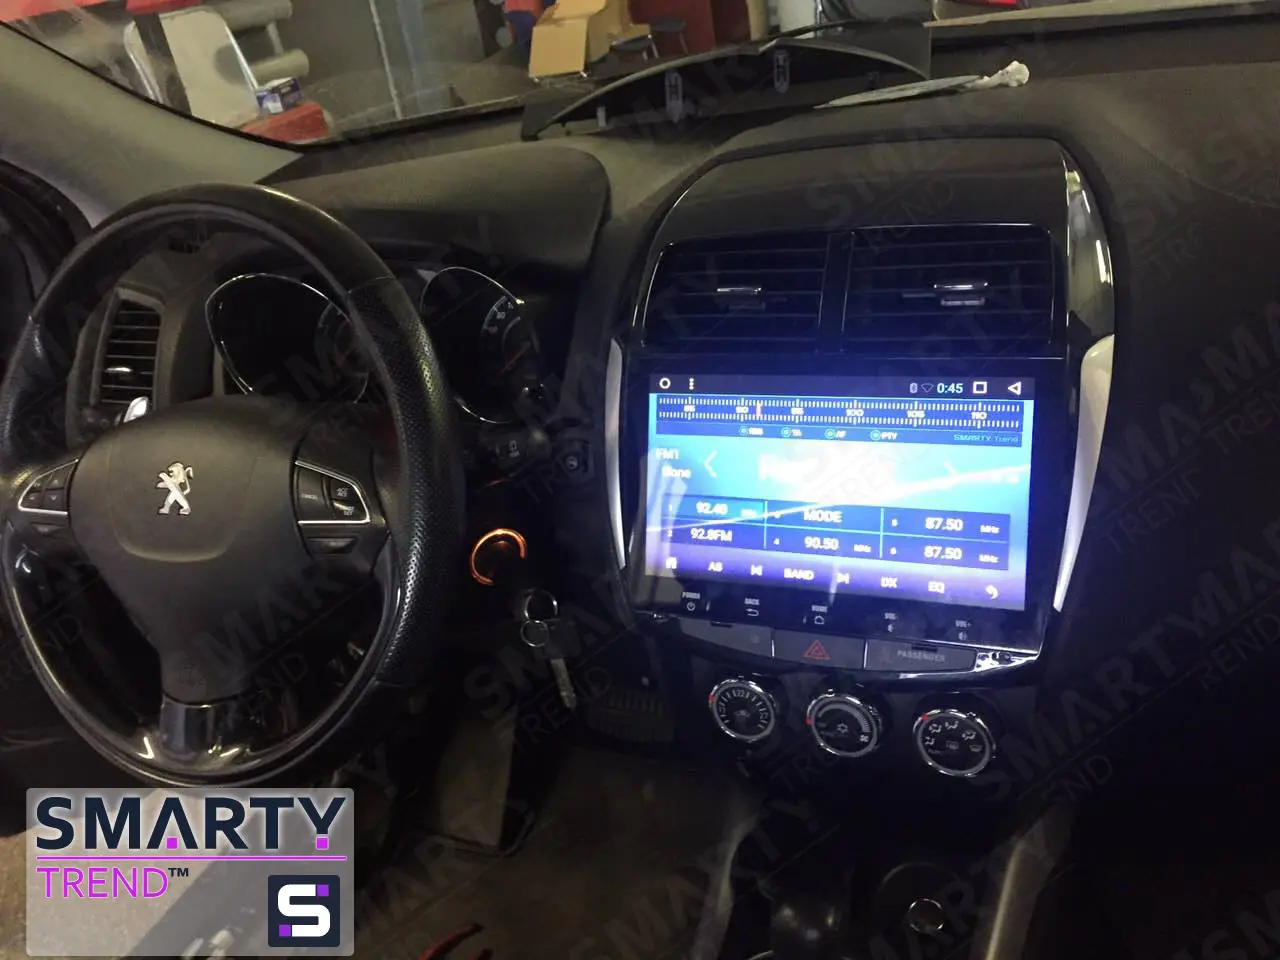  SMARTY Trend head unit for Peugeot 4008